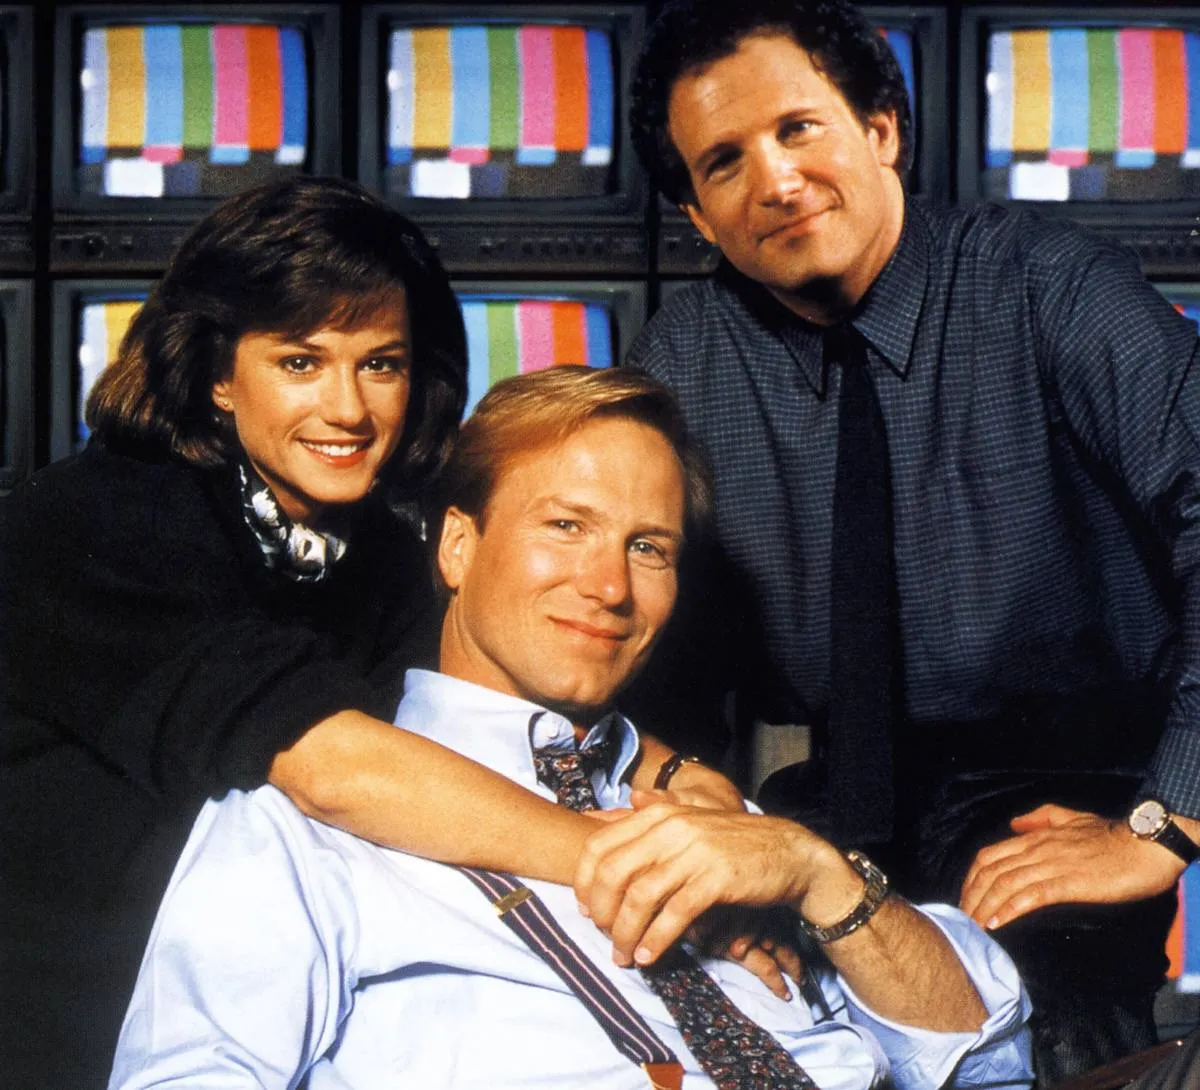 cast of broadcast news in front of tv's with colored stripes